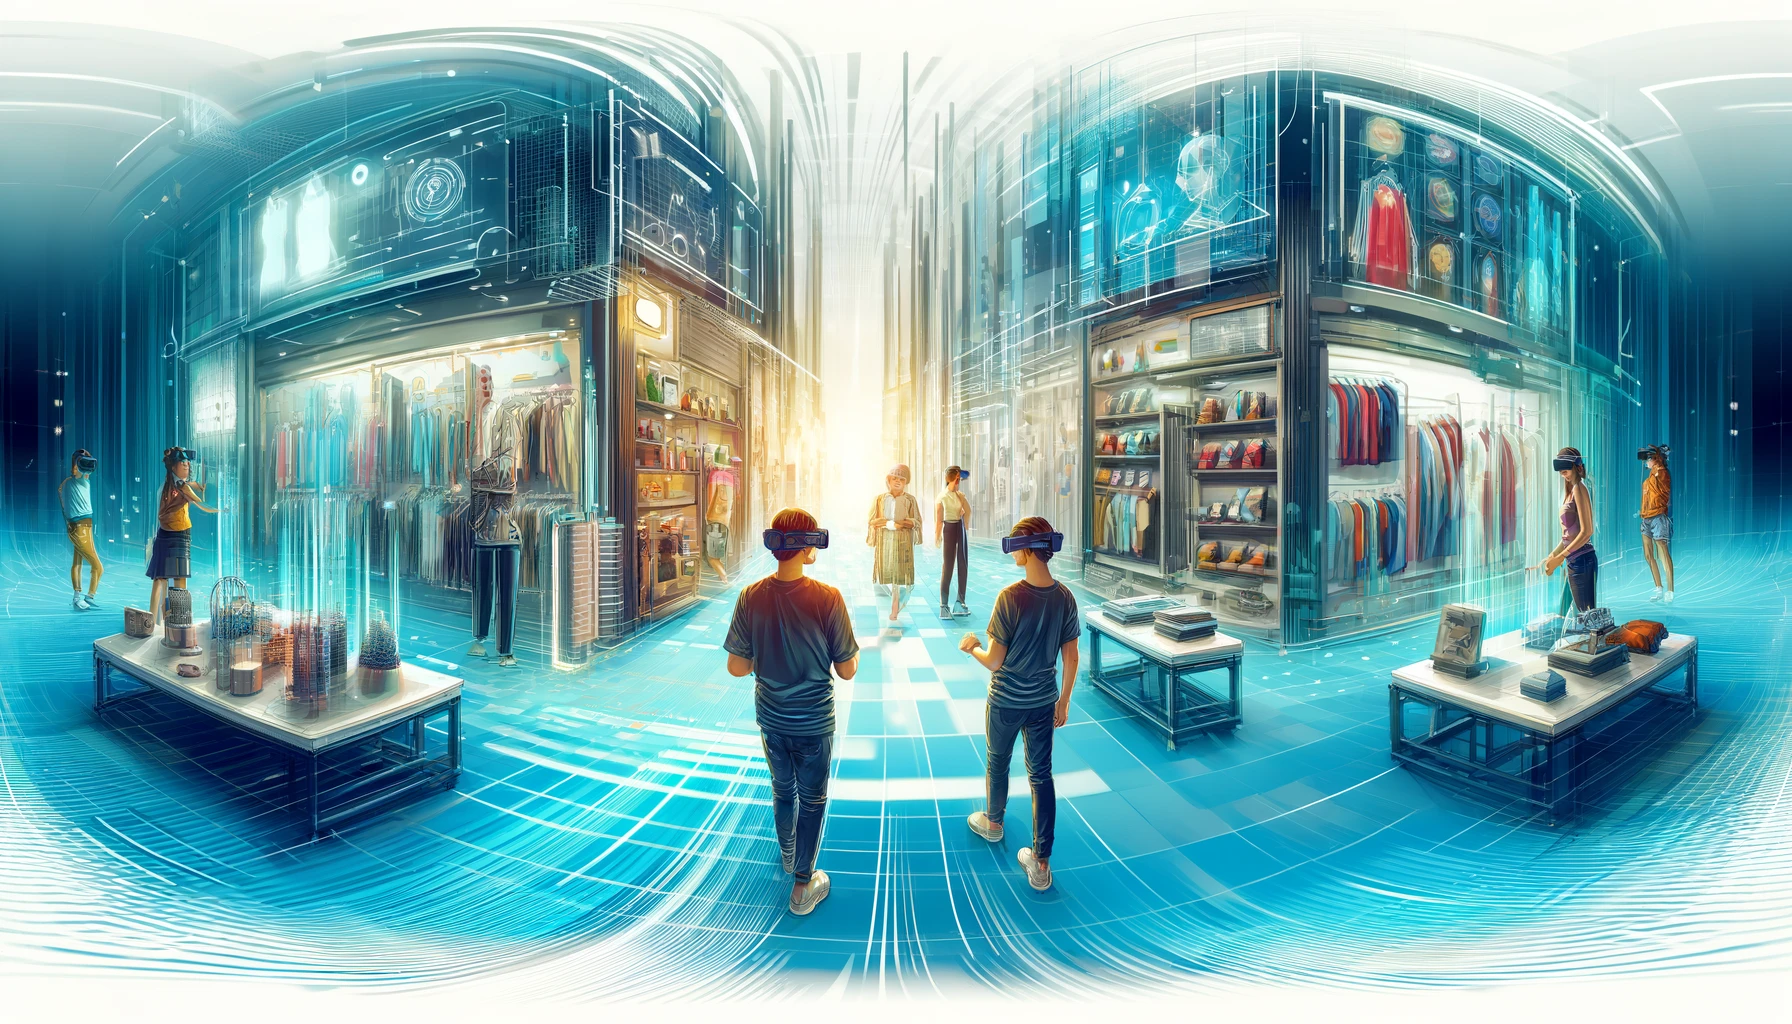 An artistic illustration of a futuristic augmented reality (AR) shopping experience in a retail store. The scene shows customers using AR headsets to try on clothes and accessories virtually. The environment is bright and modern, with digital displays and interactive screens that add to the immersive shopping experience. The style is vibrant and slightly abstract, highlighting the innovation and cutting-edge technology that transforms traditional shopping into an engaging, personalized activity.